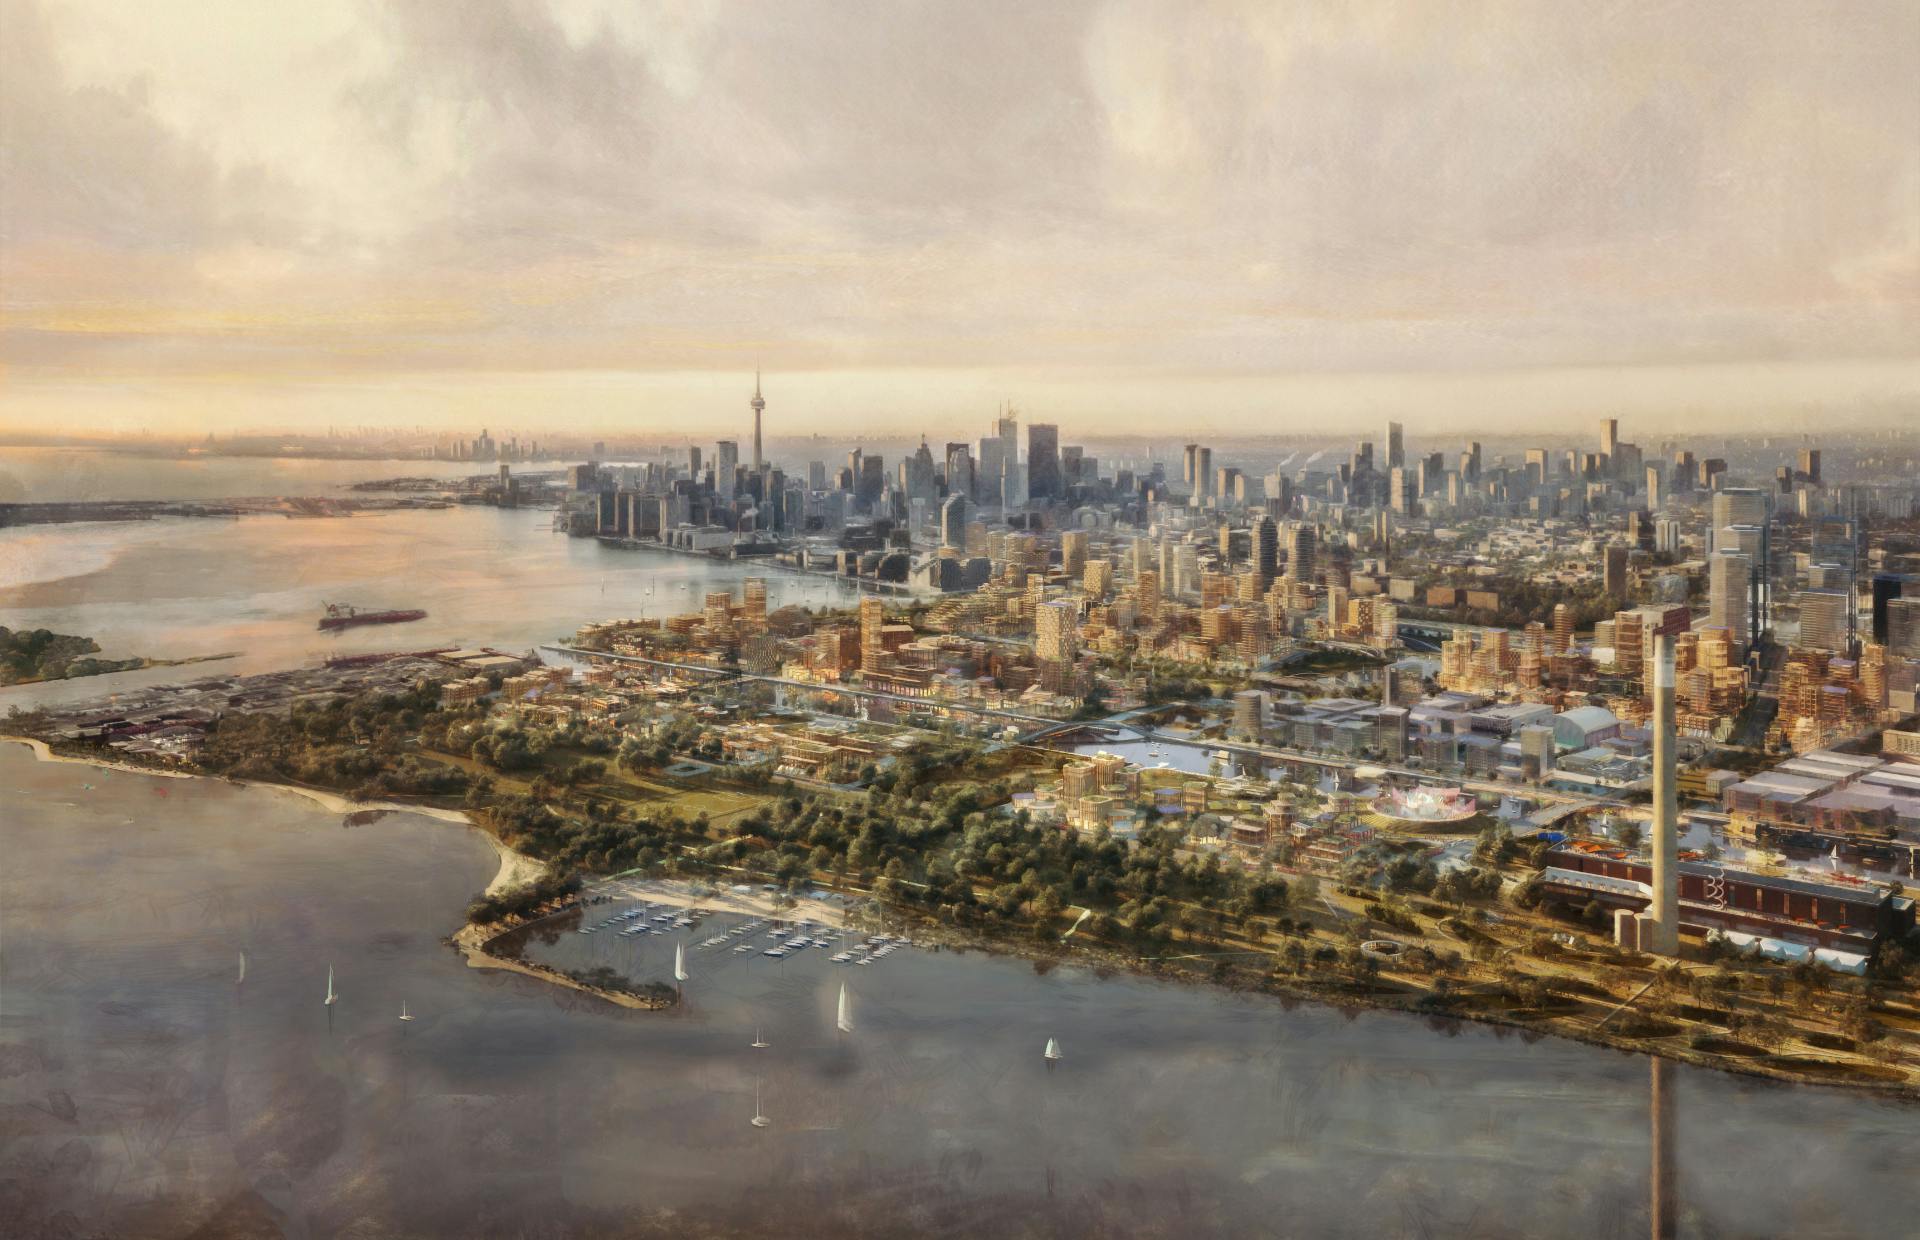 Sidewalk Labs reveals ambitious plan for Toronto’s waterfront amid concerns about privacy and democratic rights